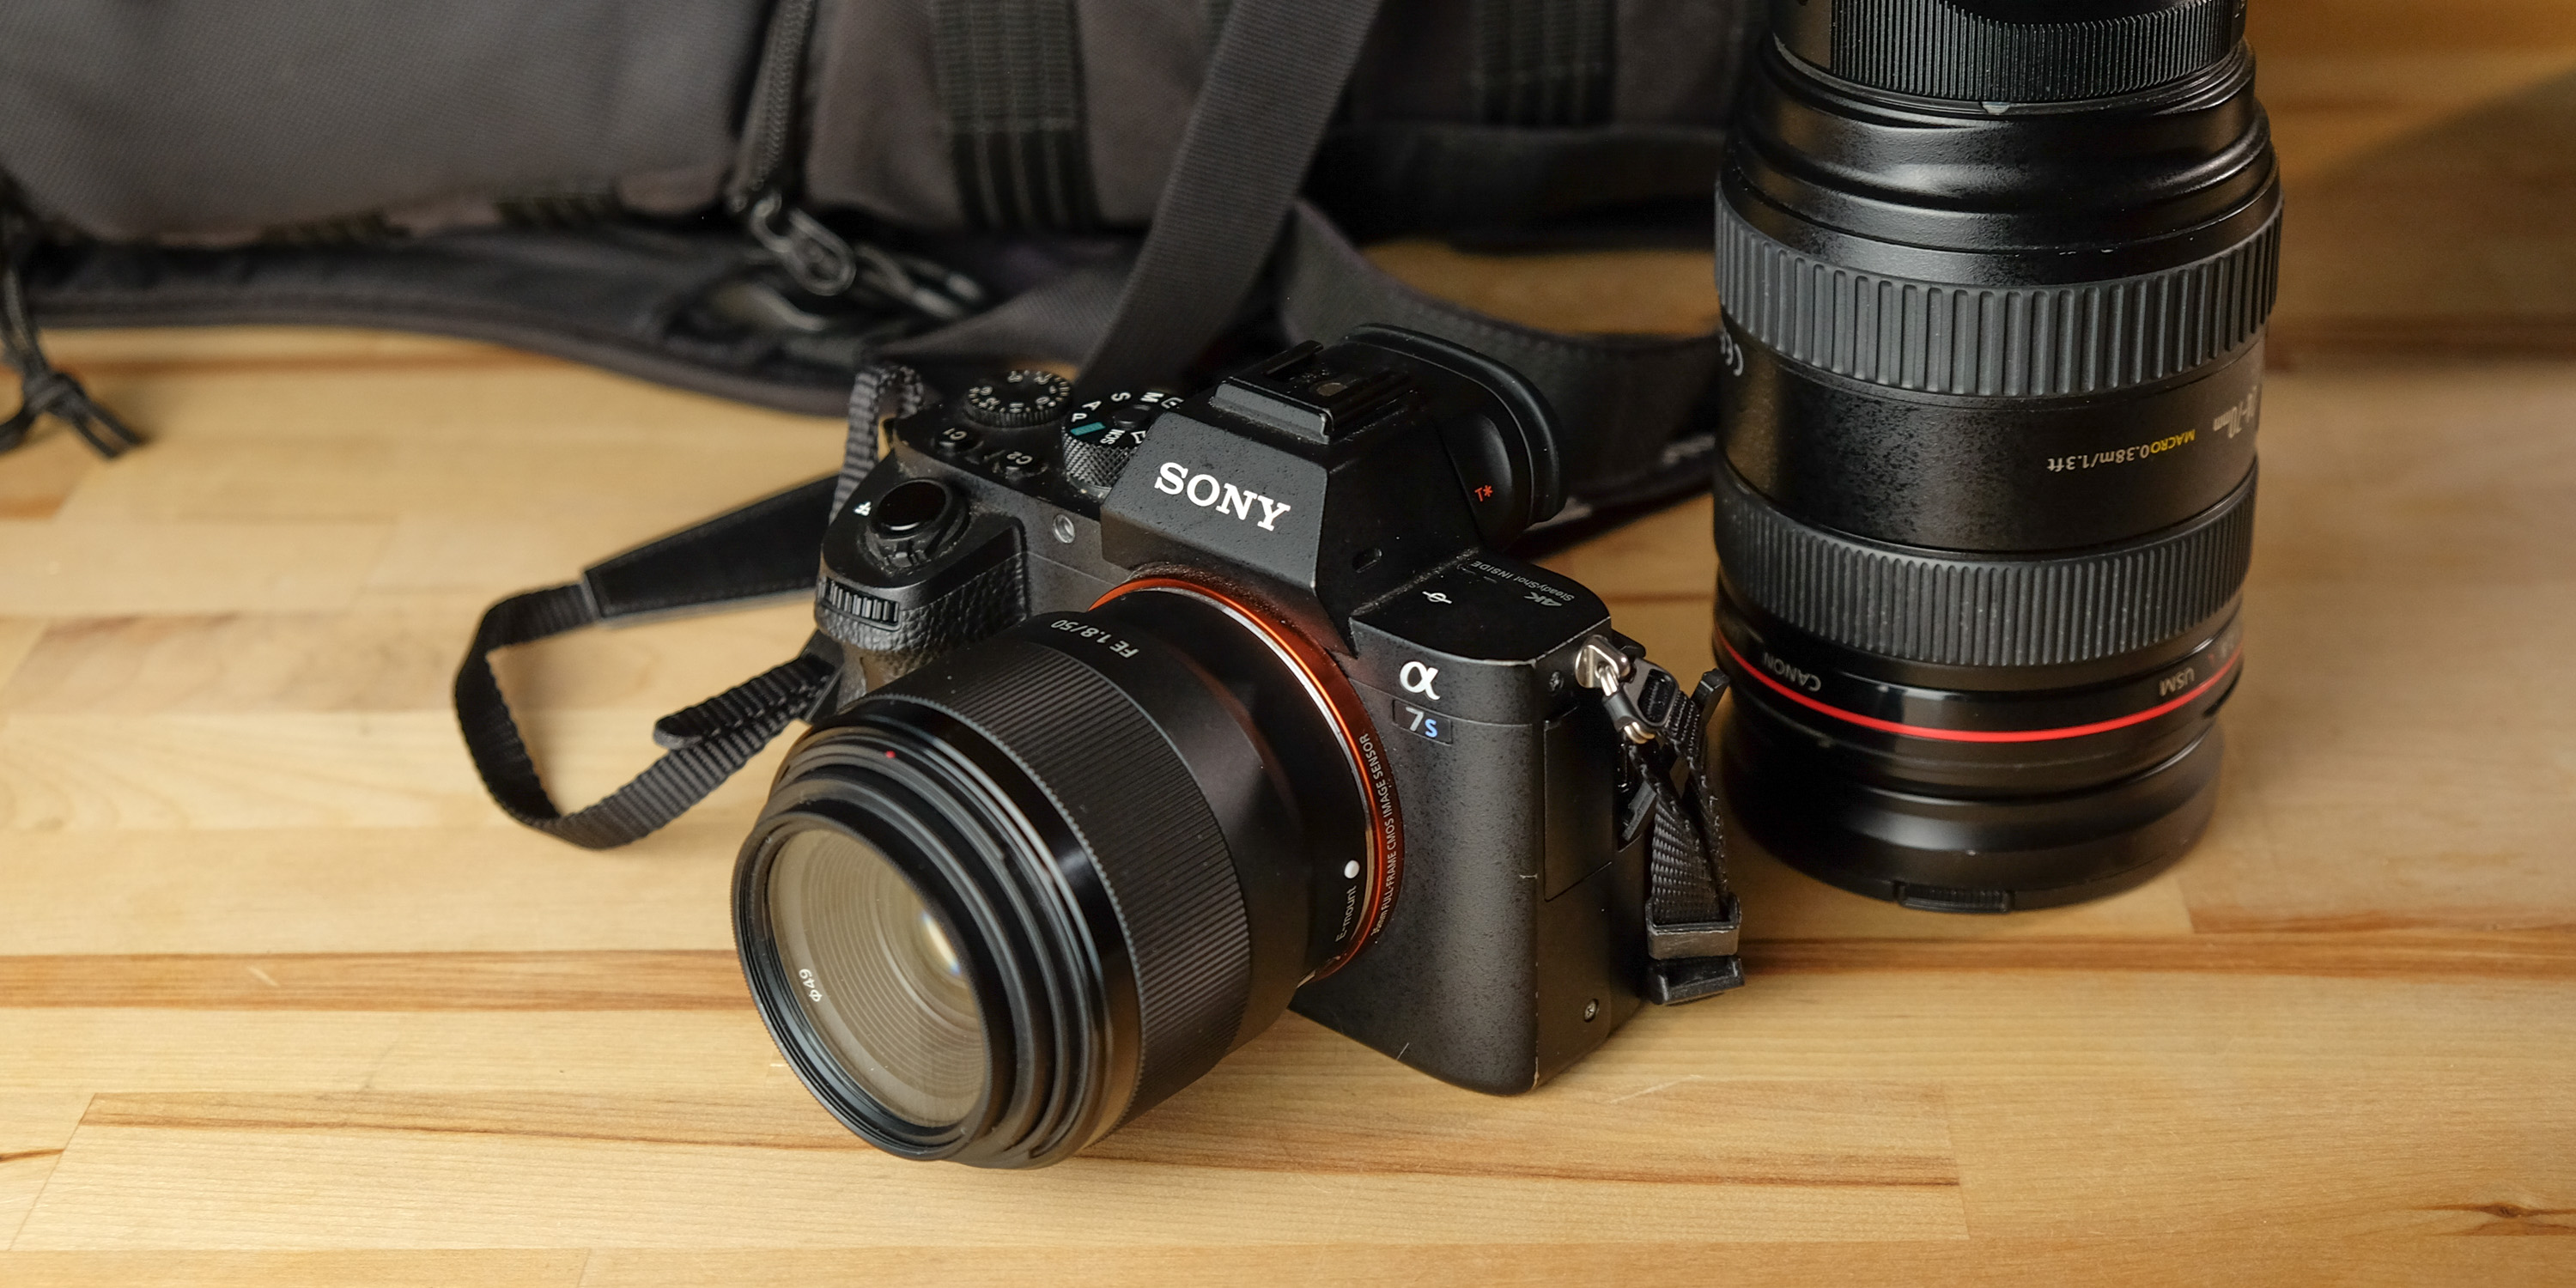 Sony a7s II and Canon 24-70 2.8 lens